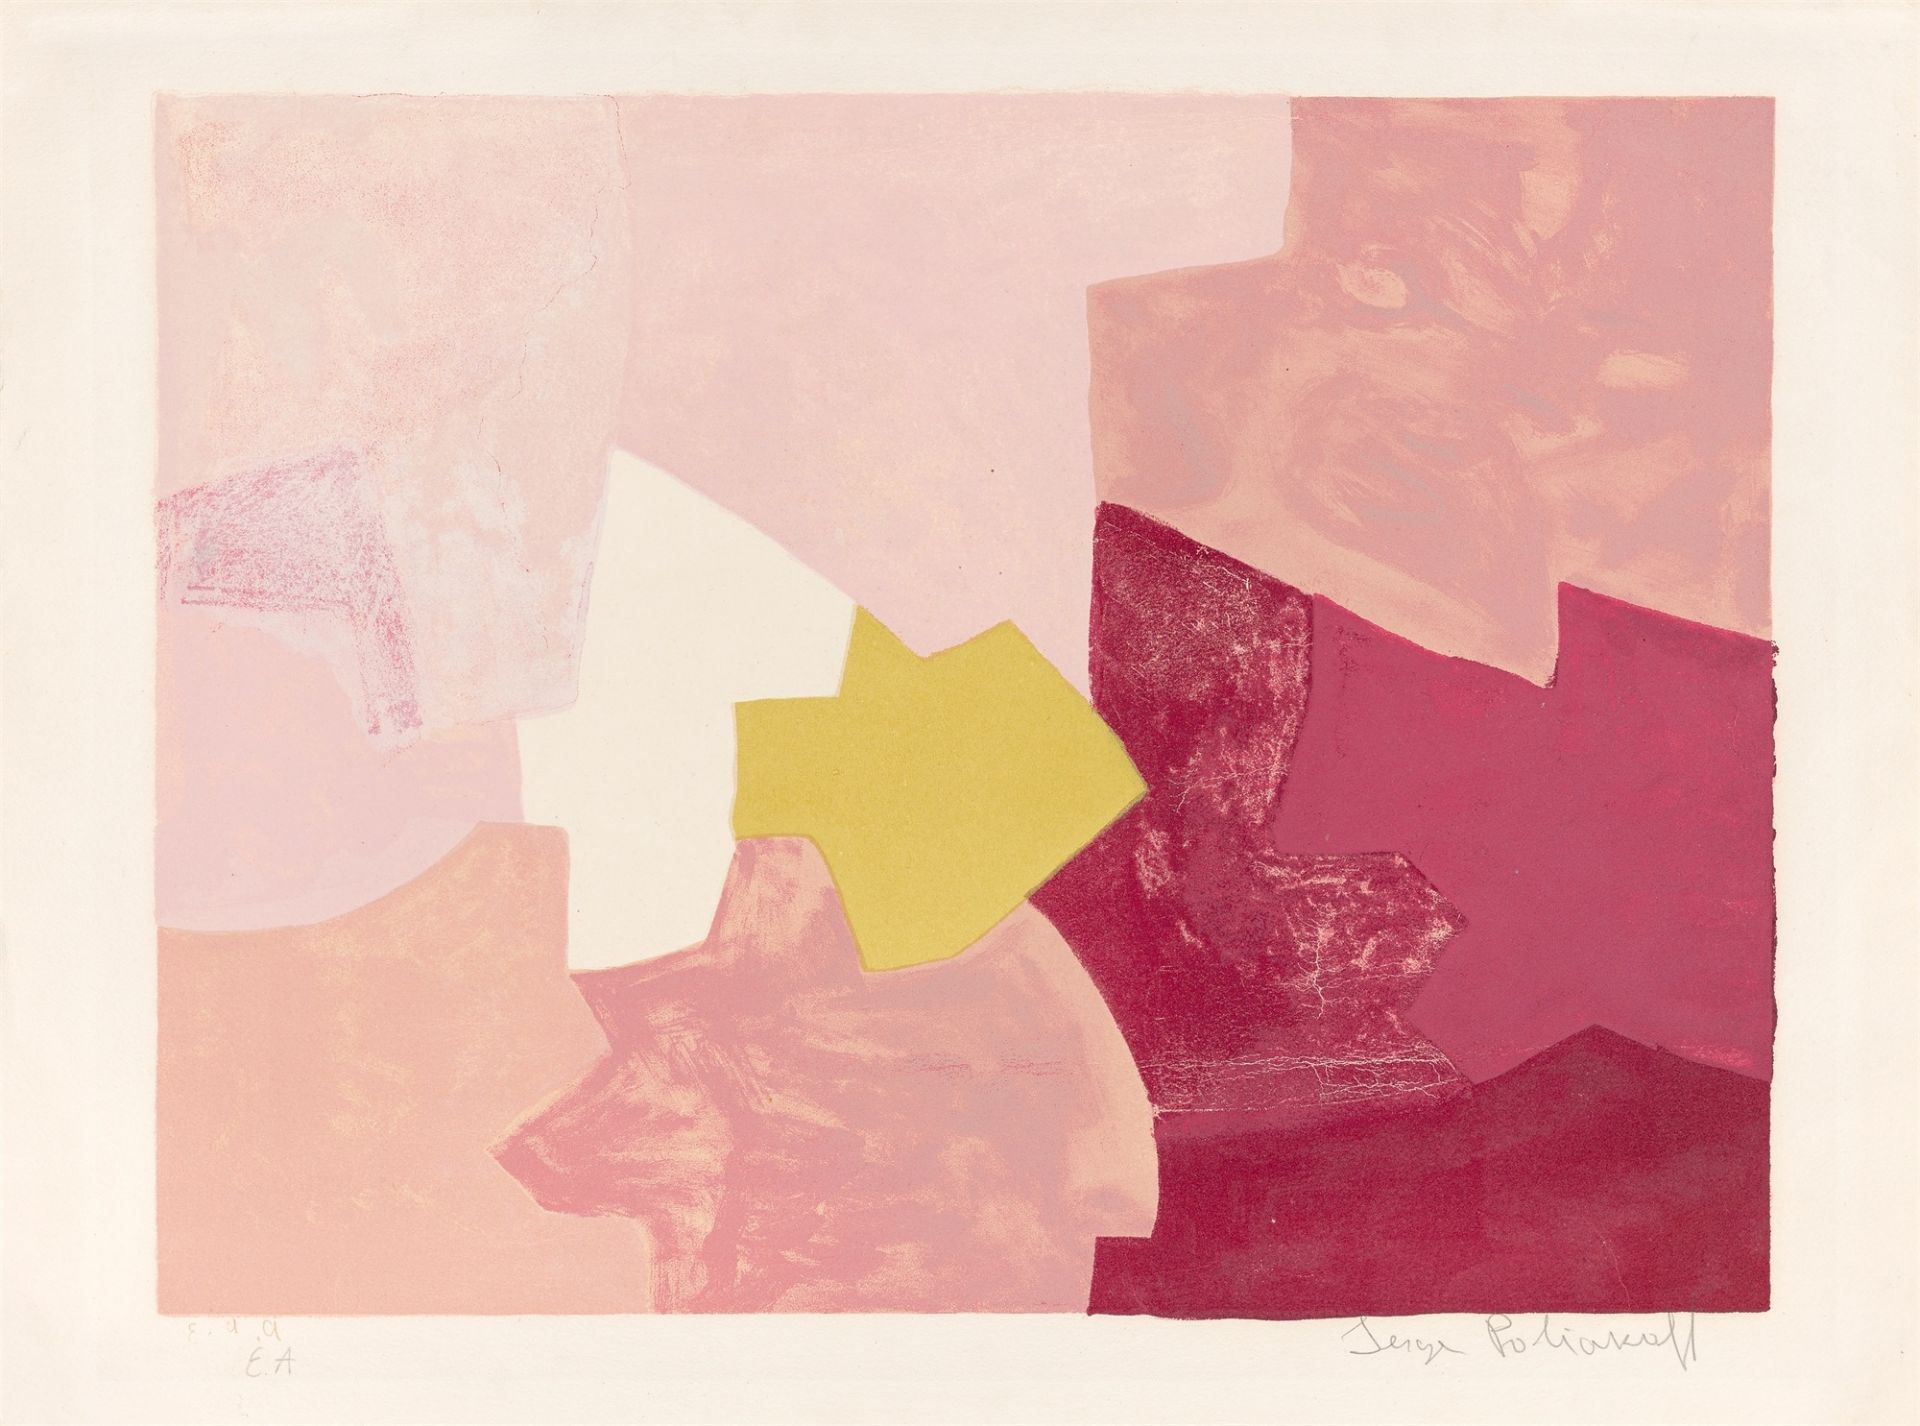 Serge Poliakoff. ”Composition rose”. 1959